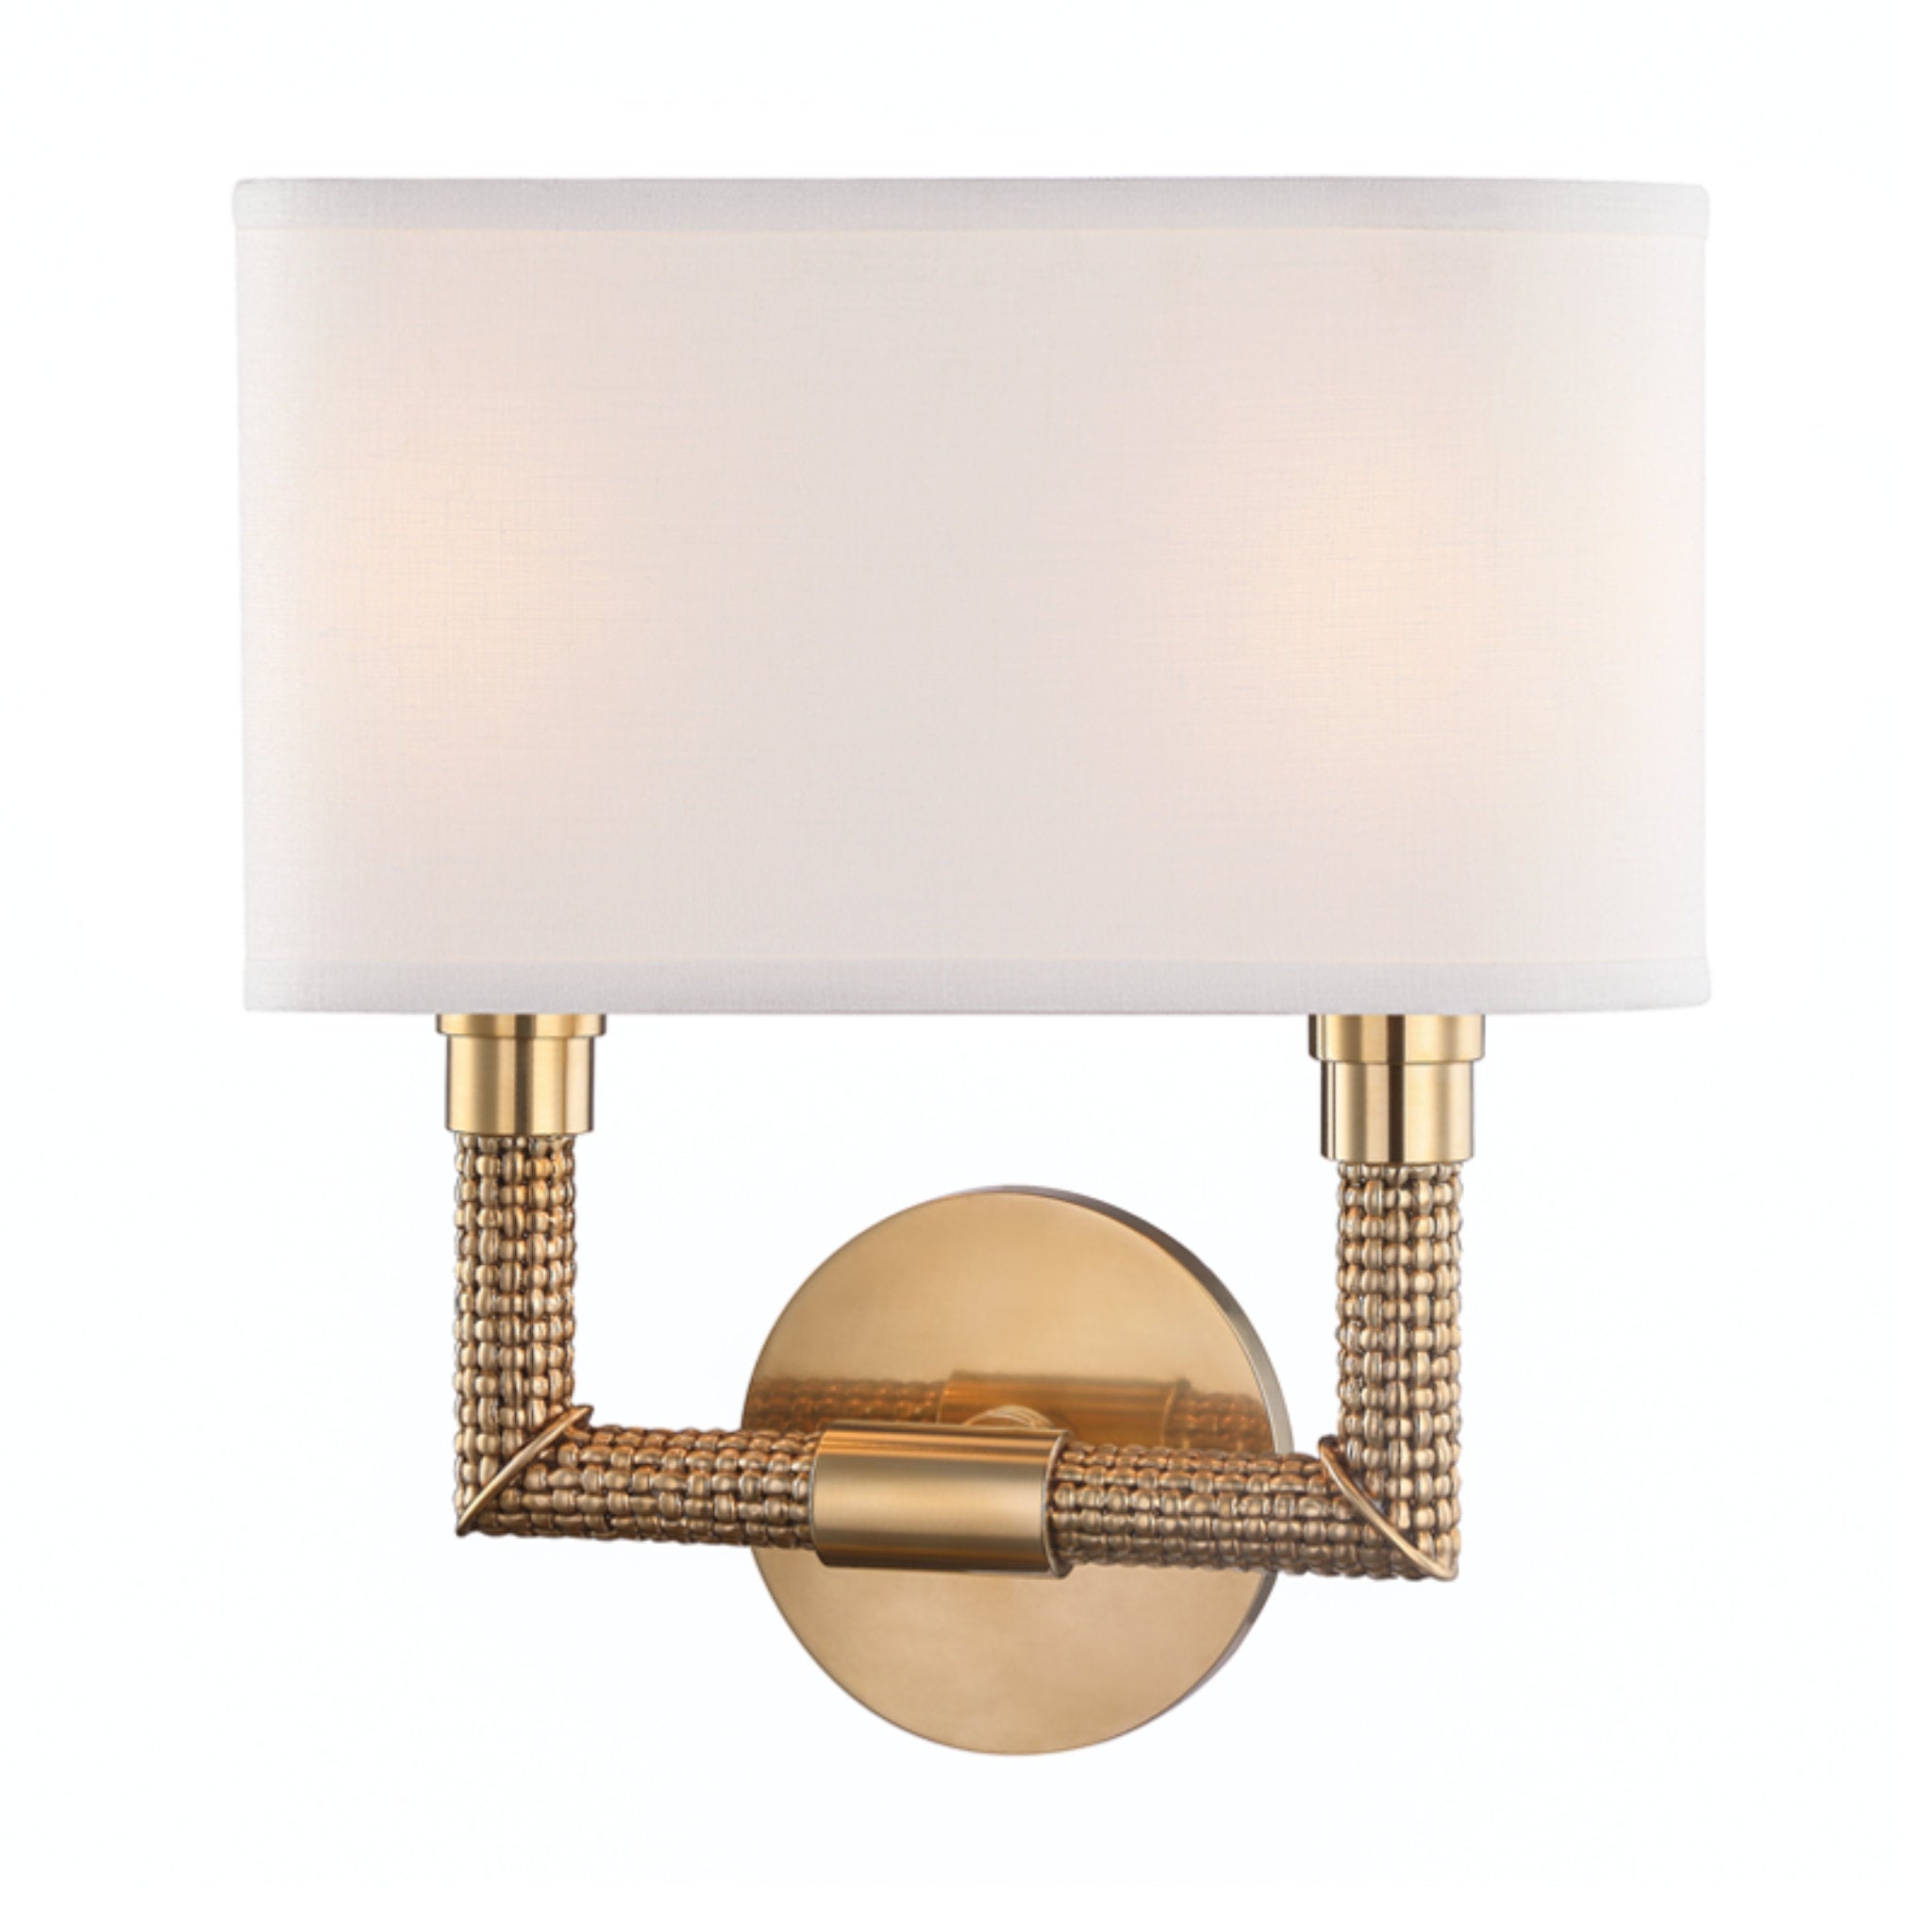 Dubois 2 Light Wall Sconce in Aged Brass